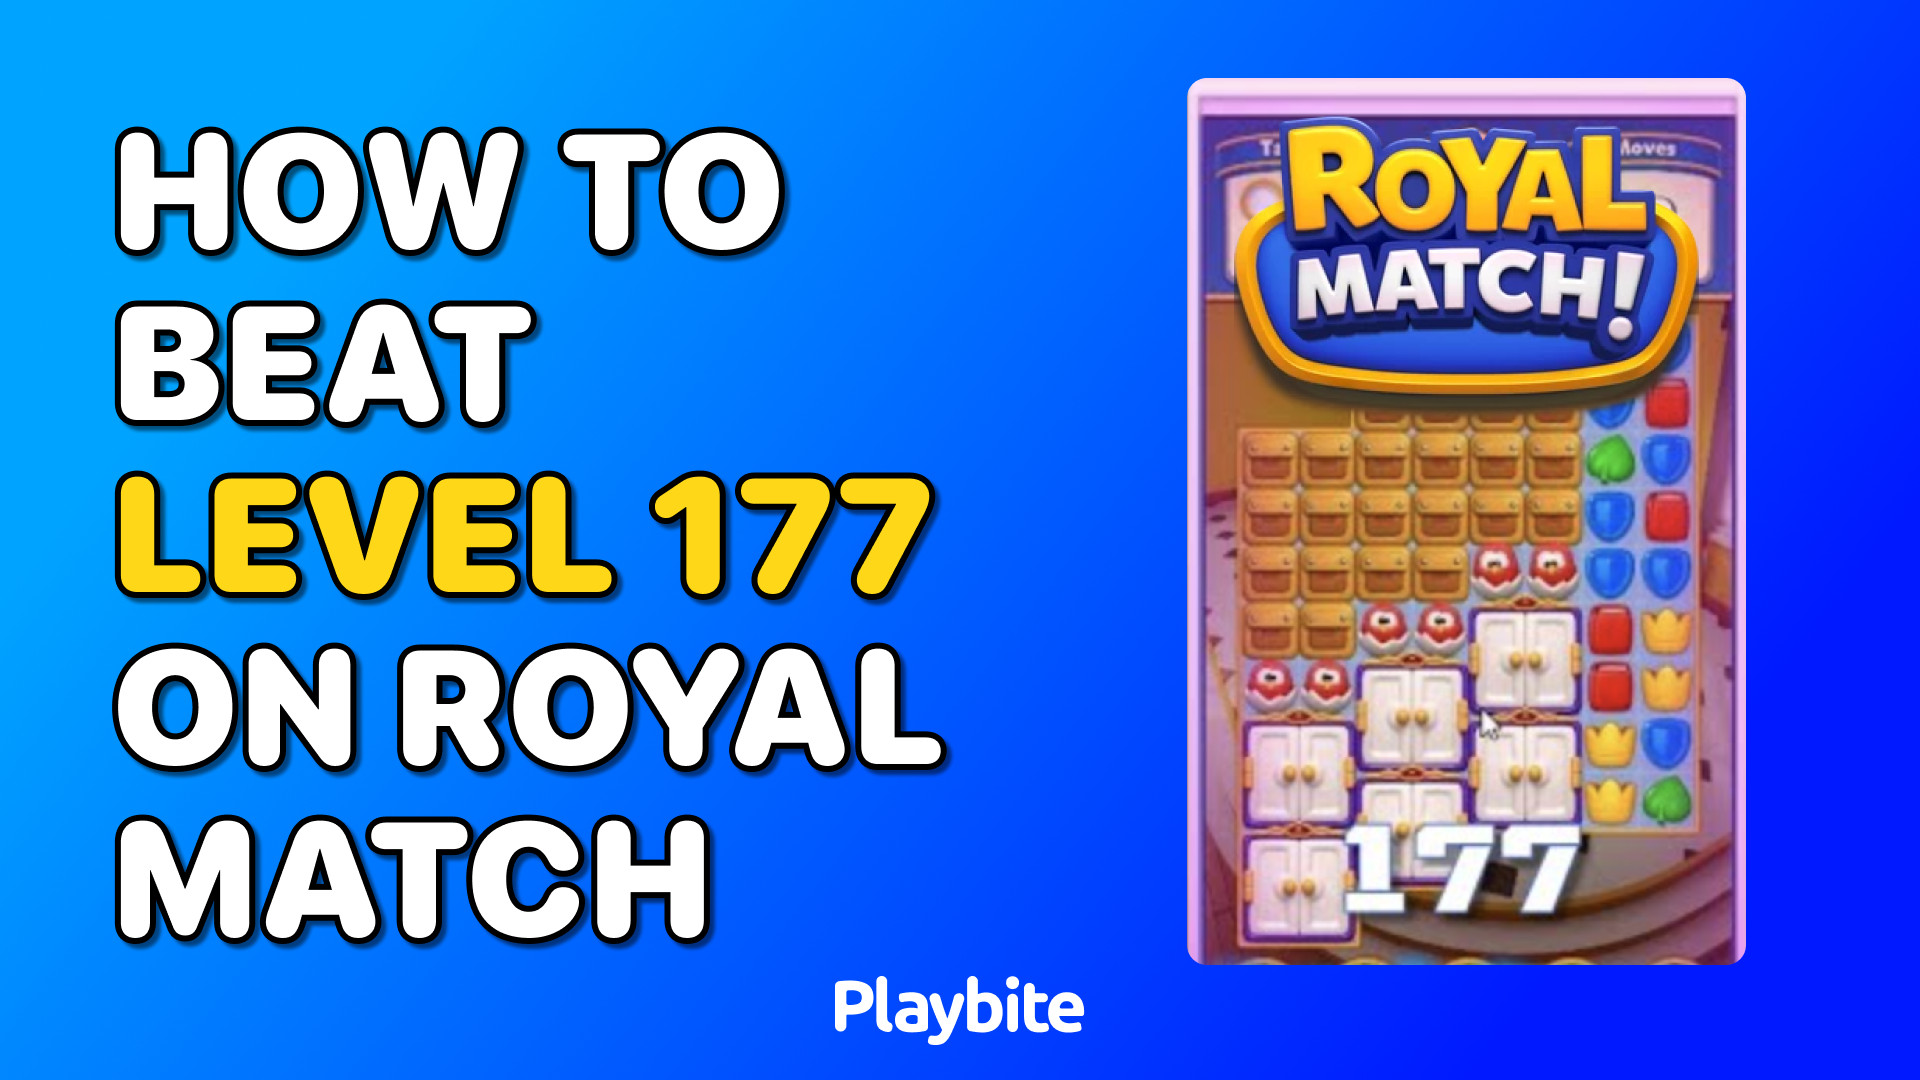 How to Beat Level 177 on Royal Match